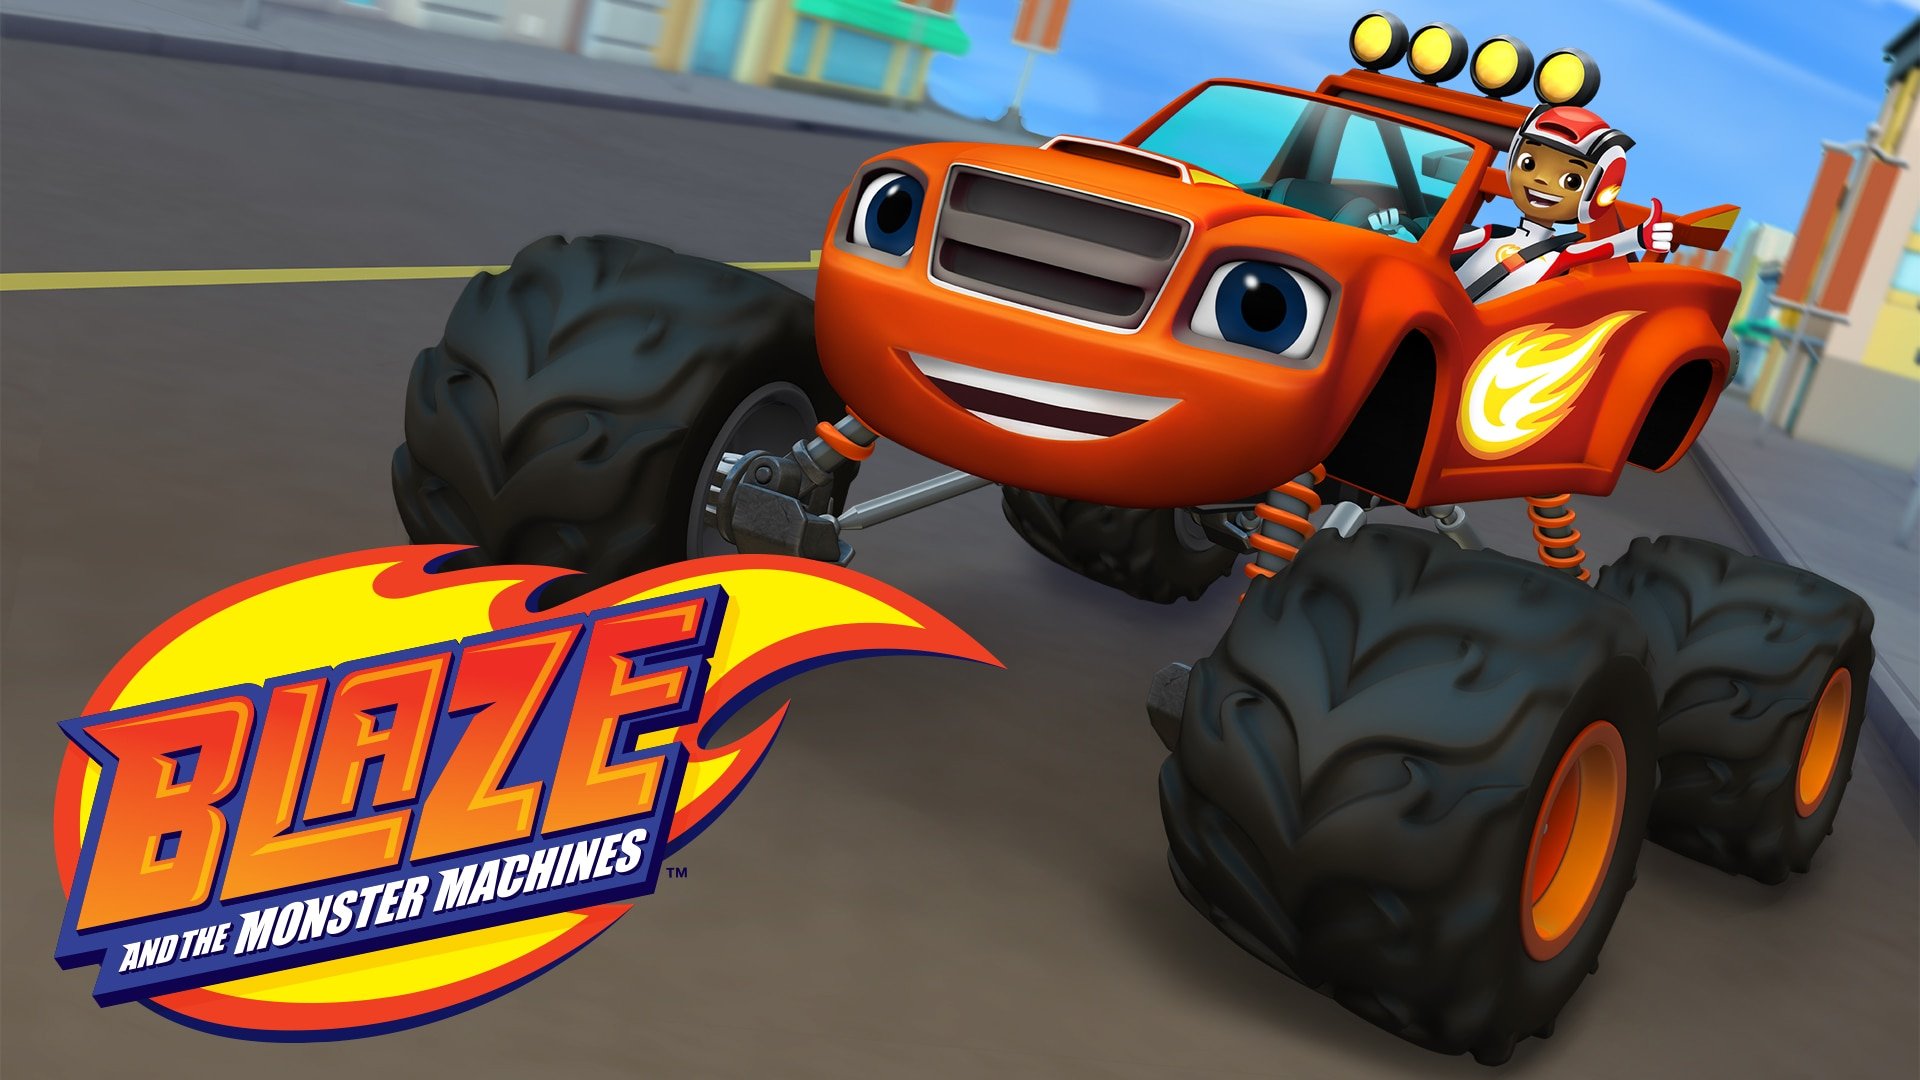 Watch Blaze And The Monster Machines Online - Stream Full Episodes